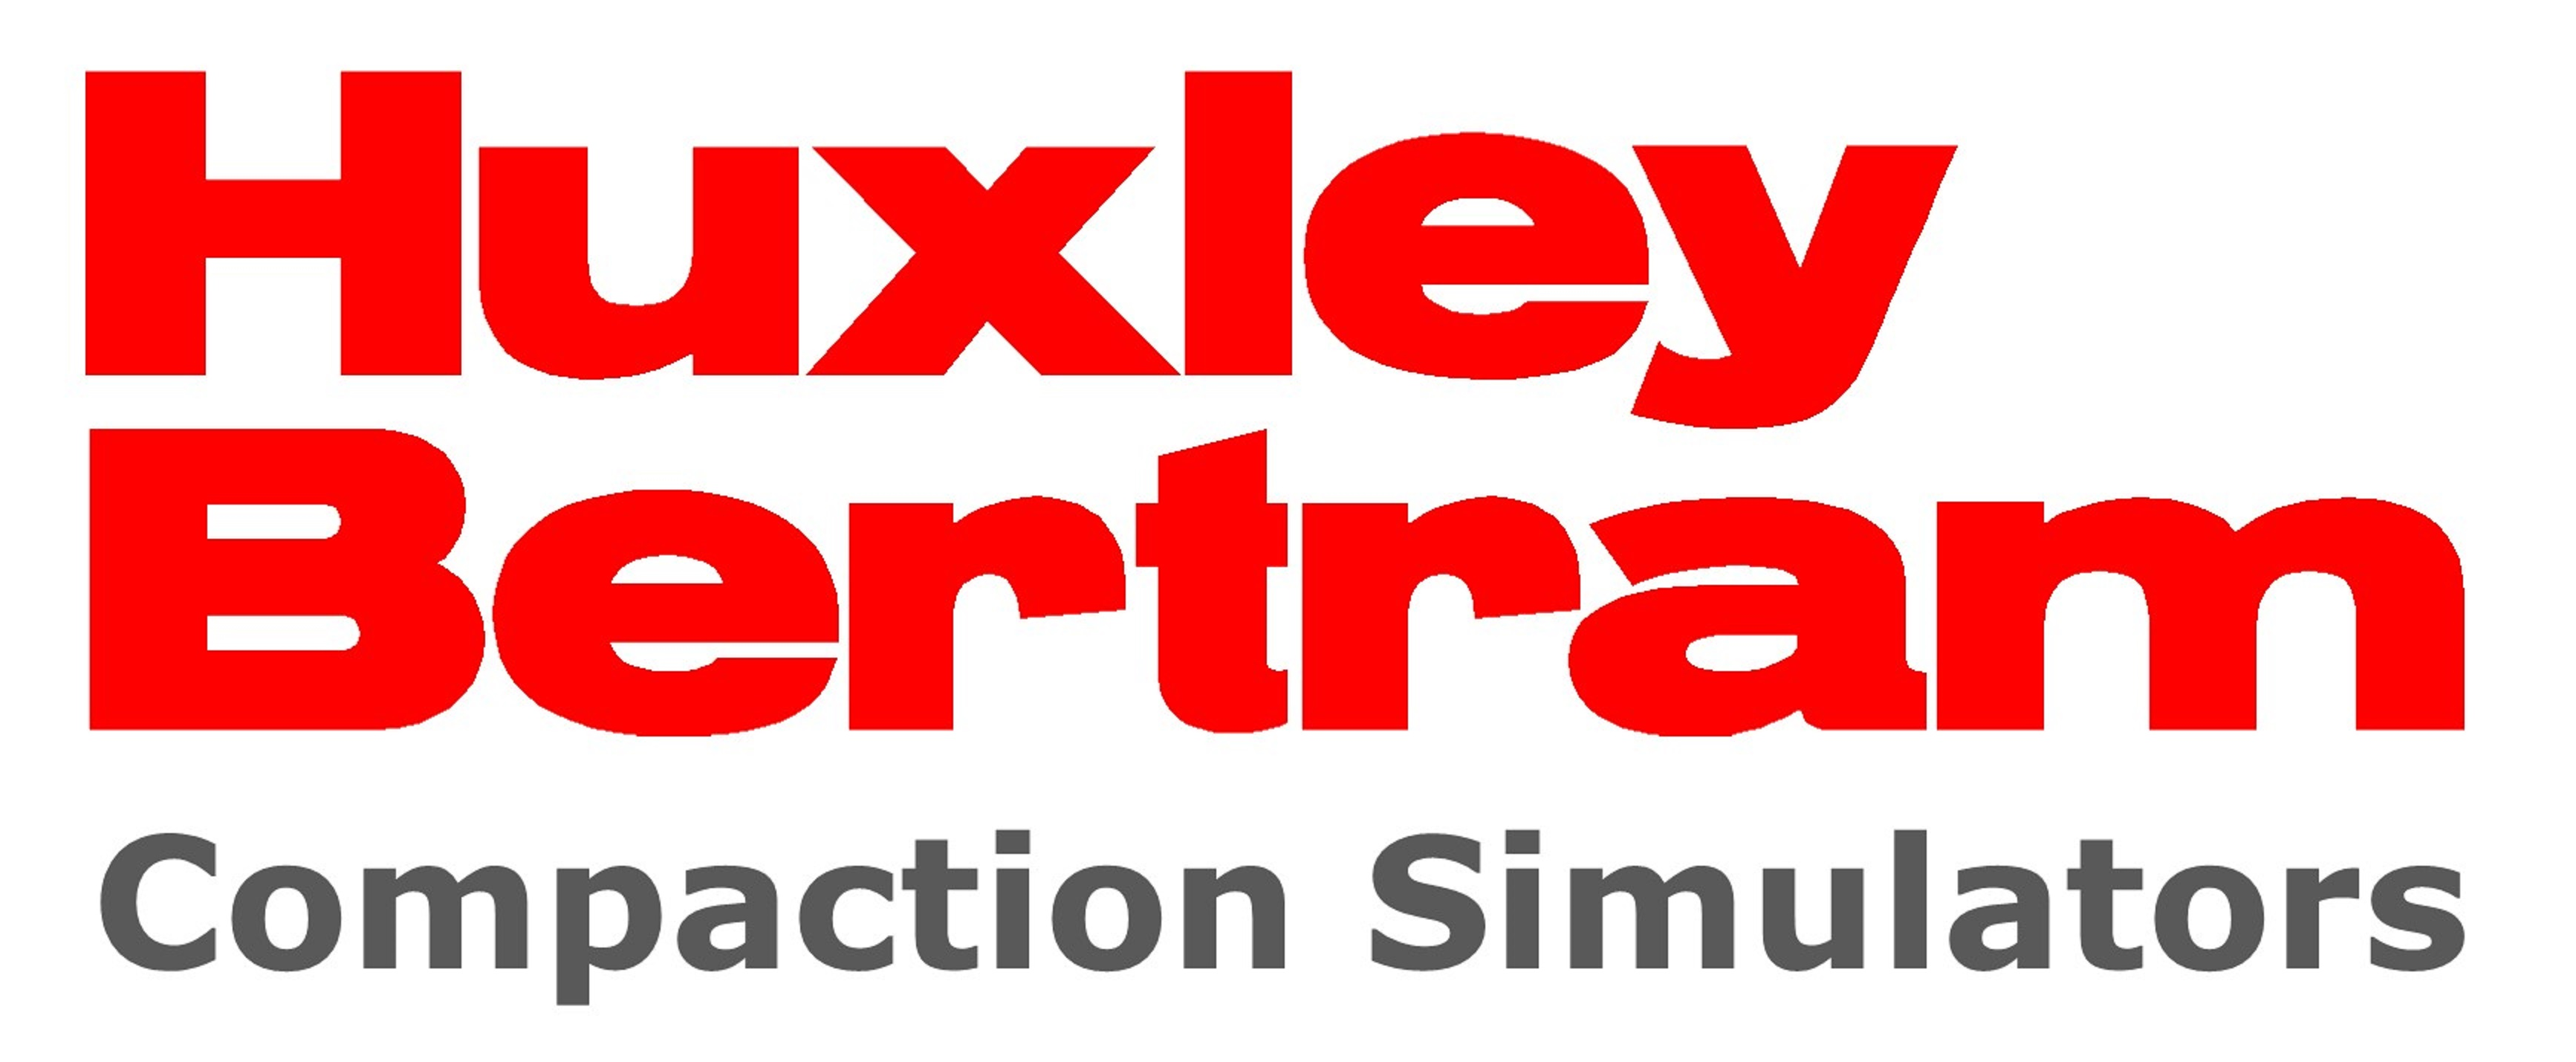 Huxley Bertram prominent at Compaction Simulation Forum